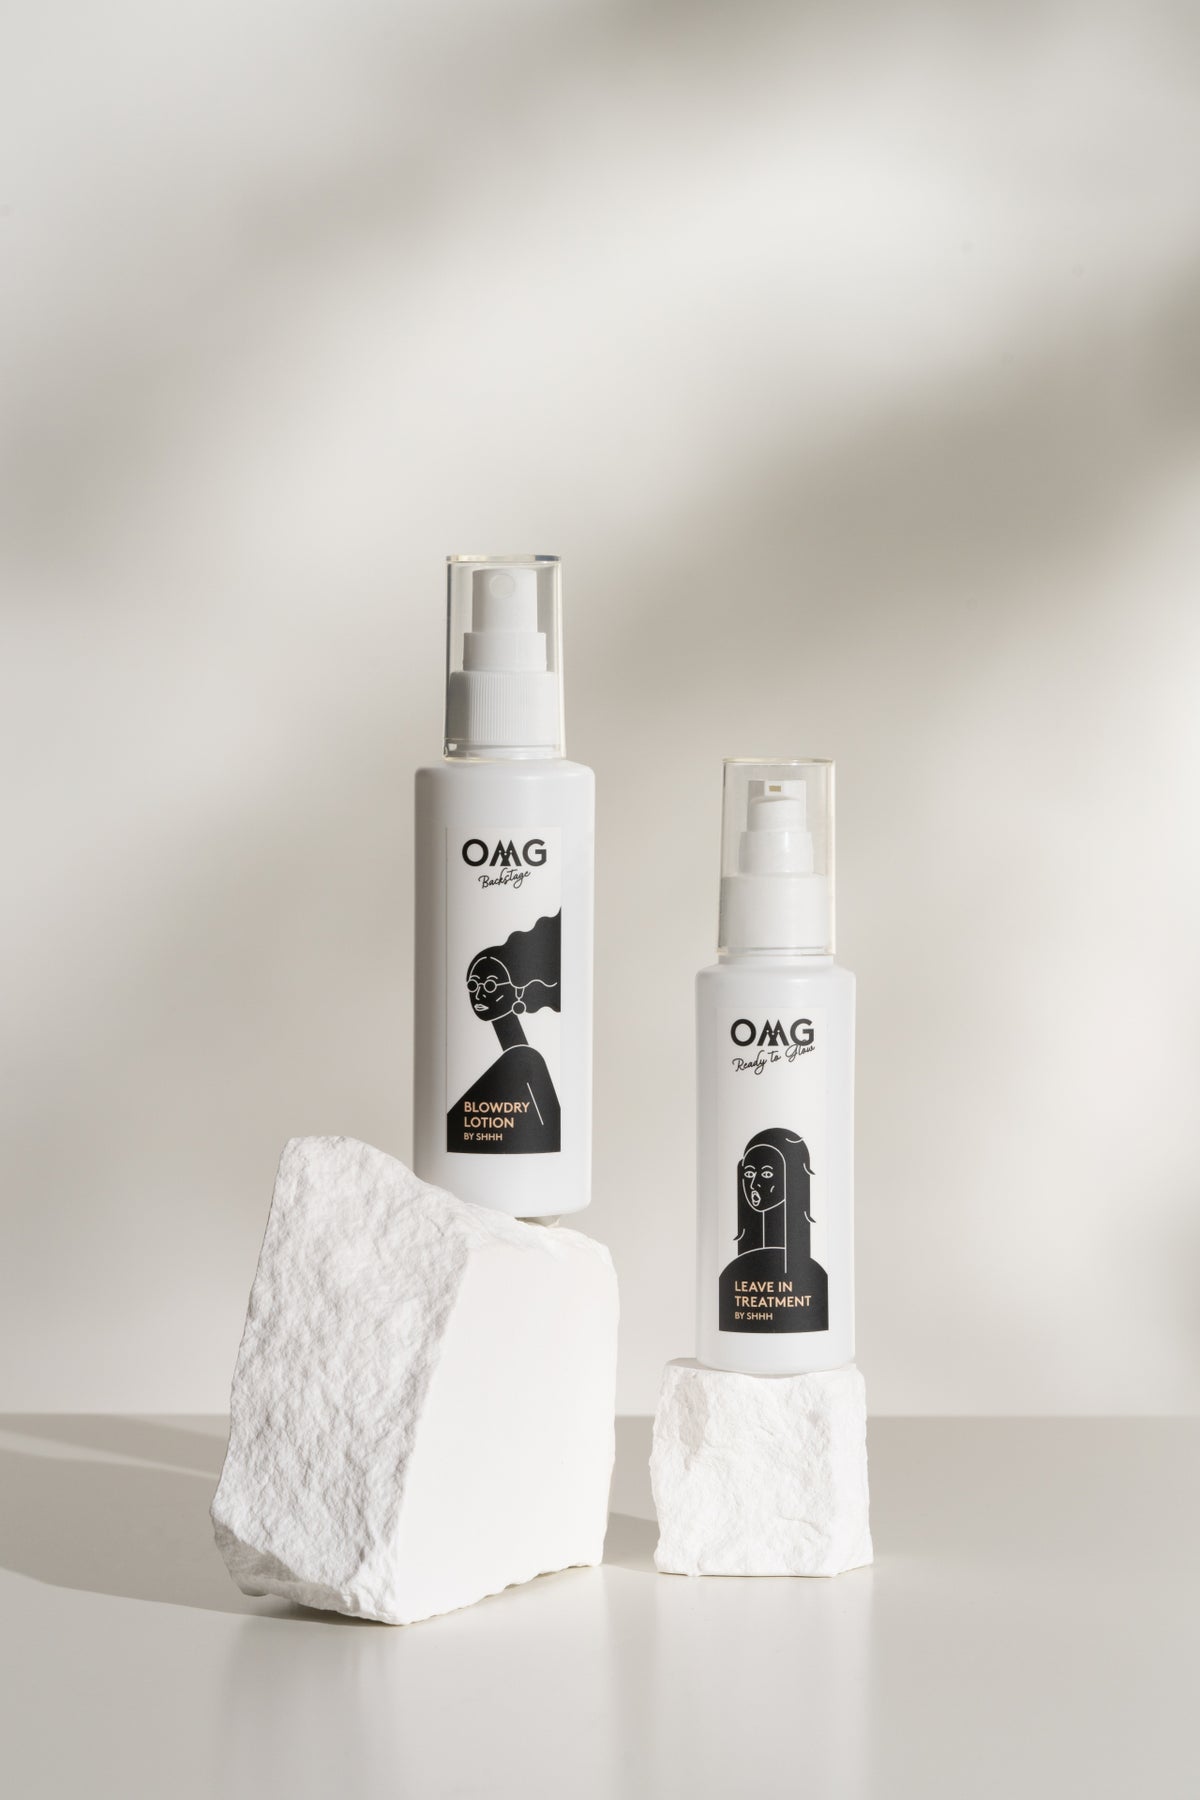 OMG 'Ready to Glow' Leave-in Treatment (100ml)